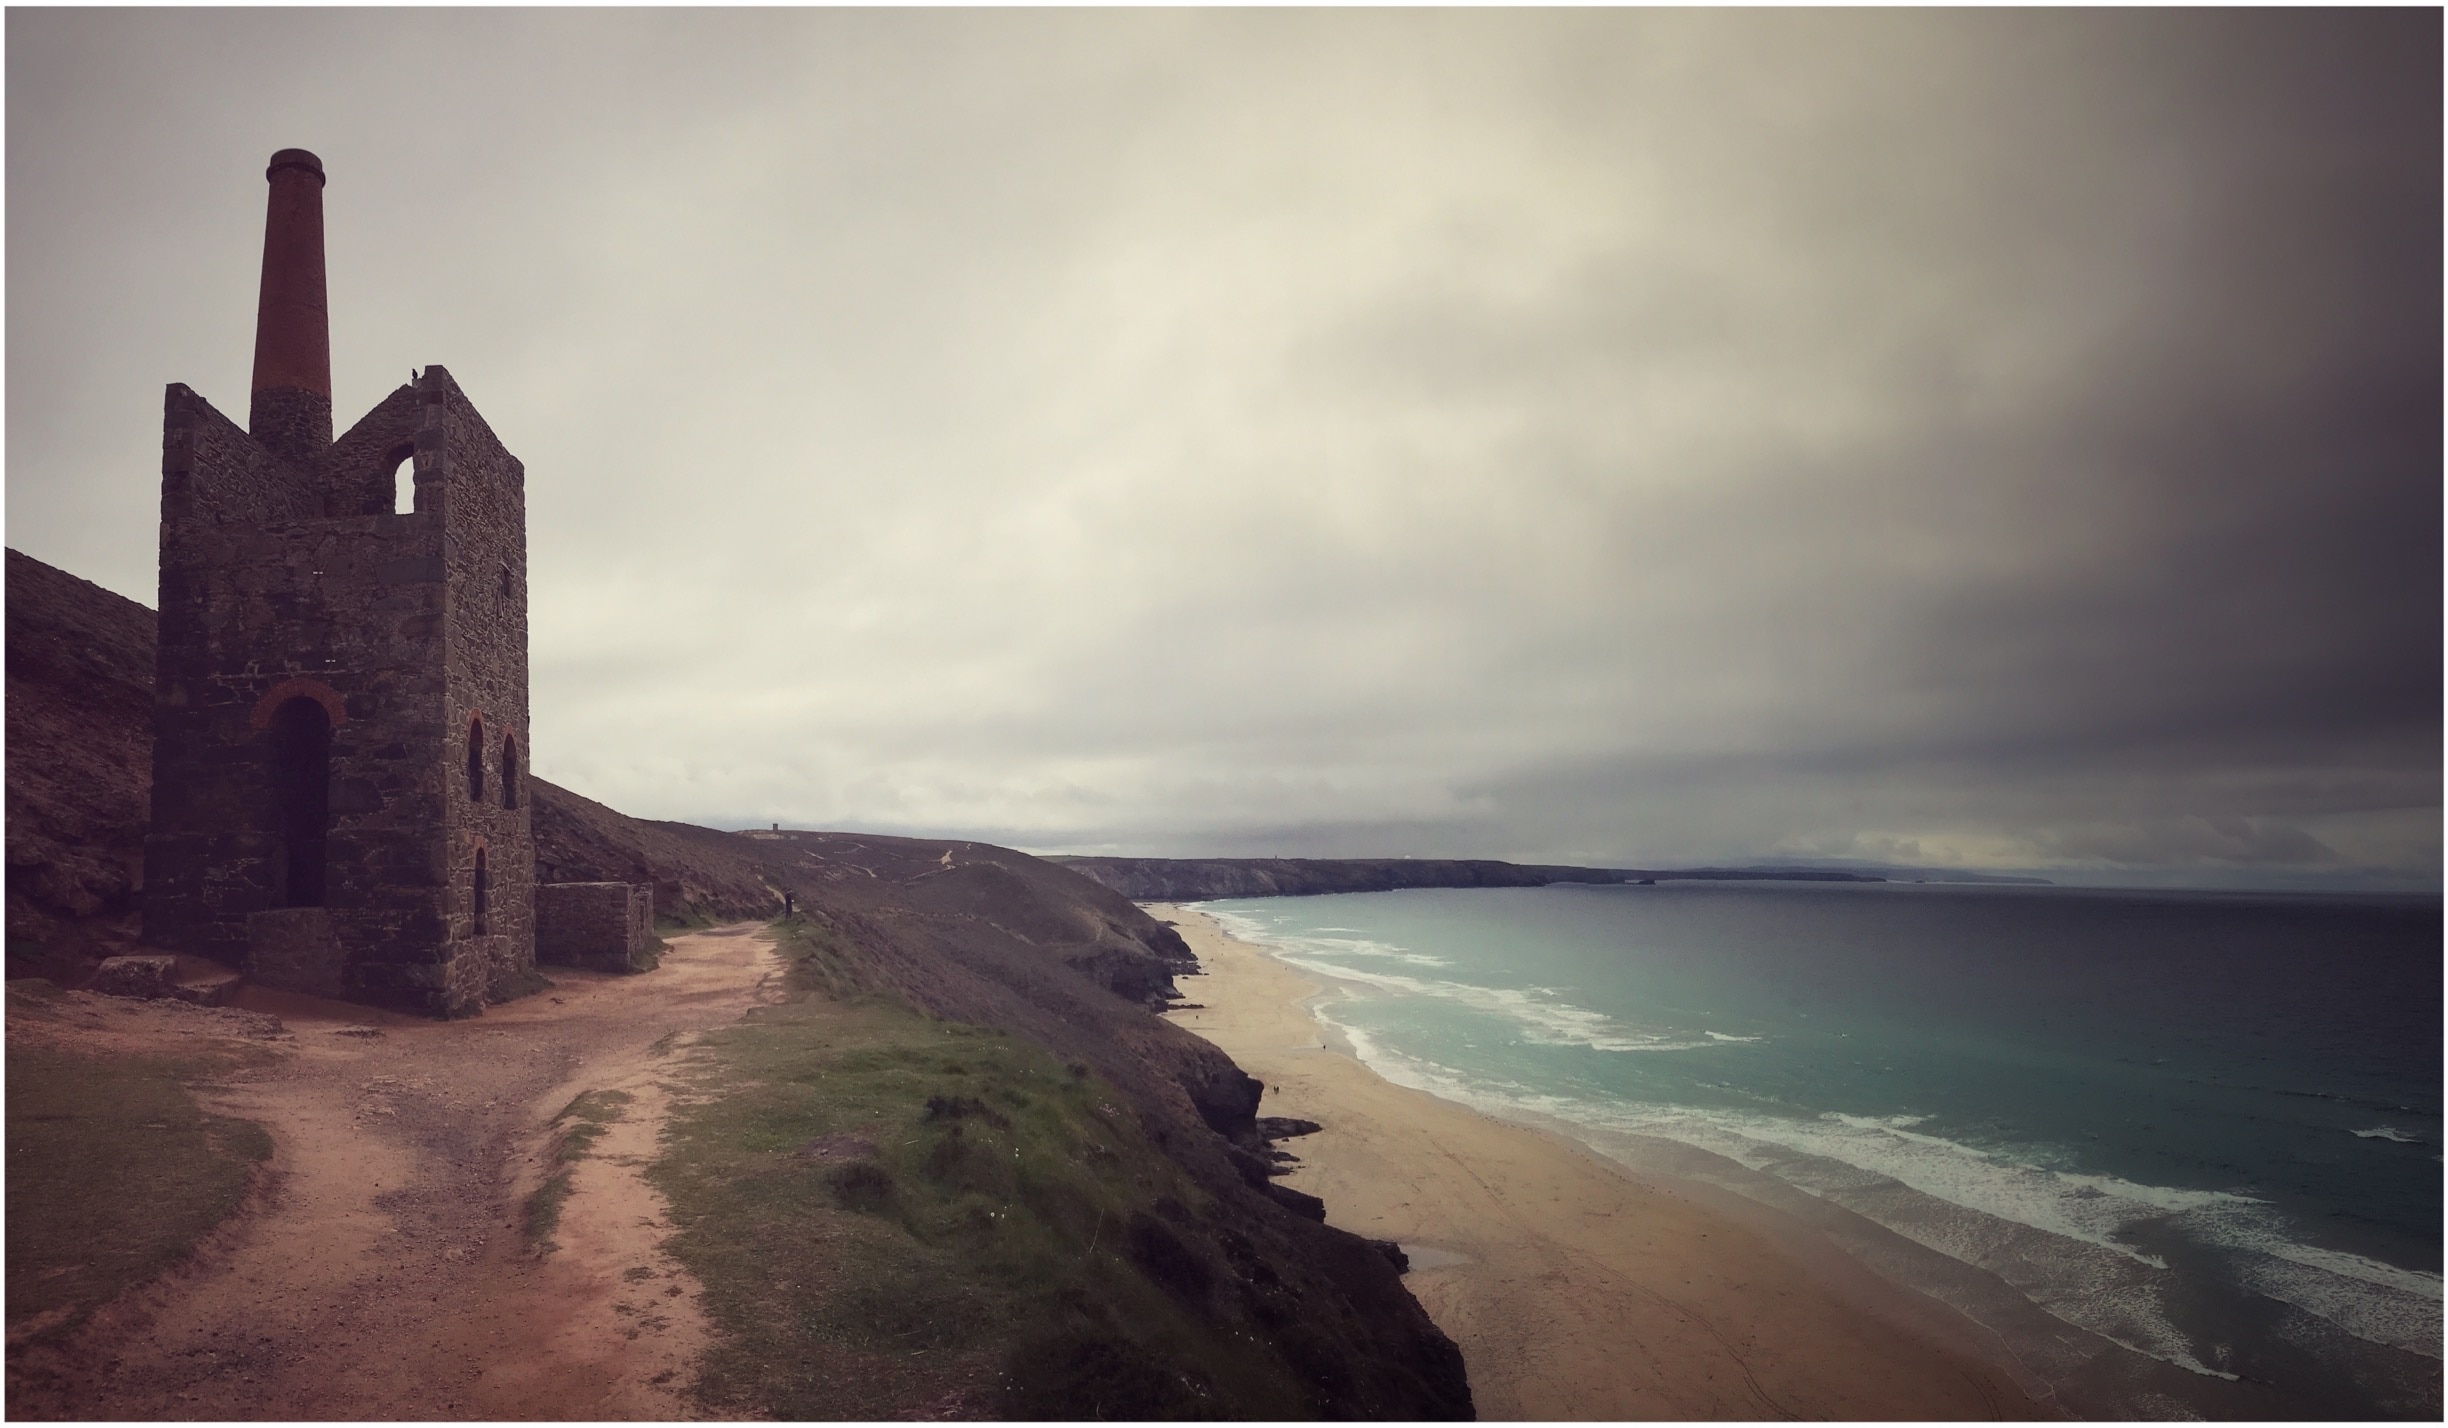 Wheal Coates Tin Mine - Poldark Filming location with breathtaking views from the Coastal Path. Beautiful long stretch of beach accessed at low tide. 